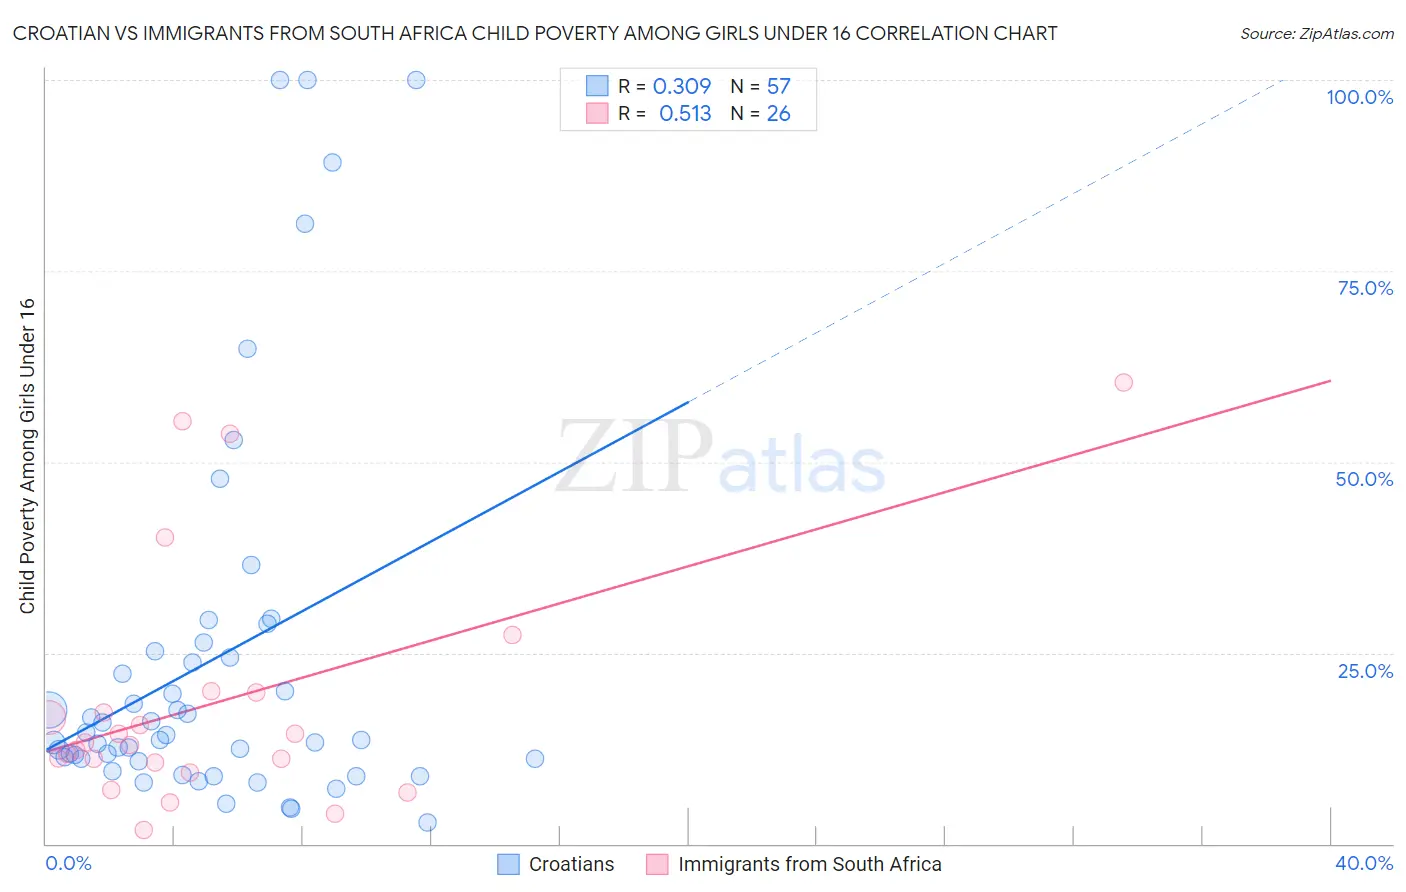 Croatian vs Immigrants from South Africa Child Poverty Among Girls Under 16